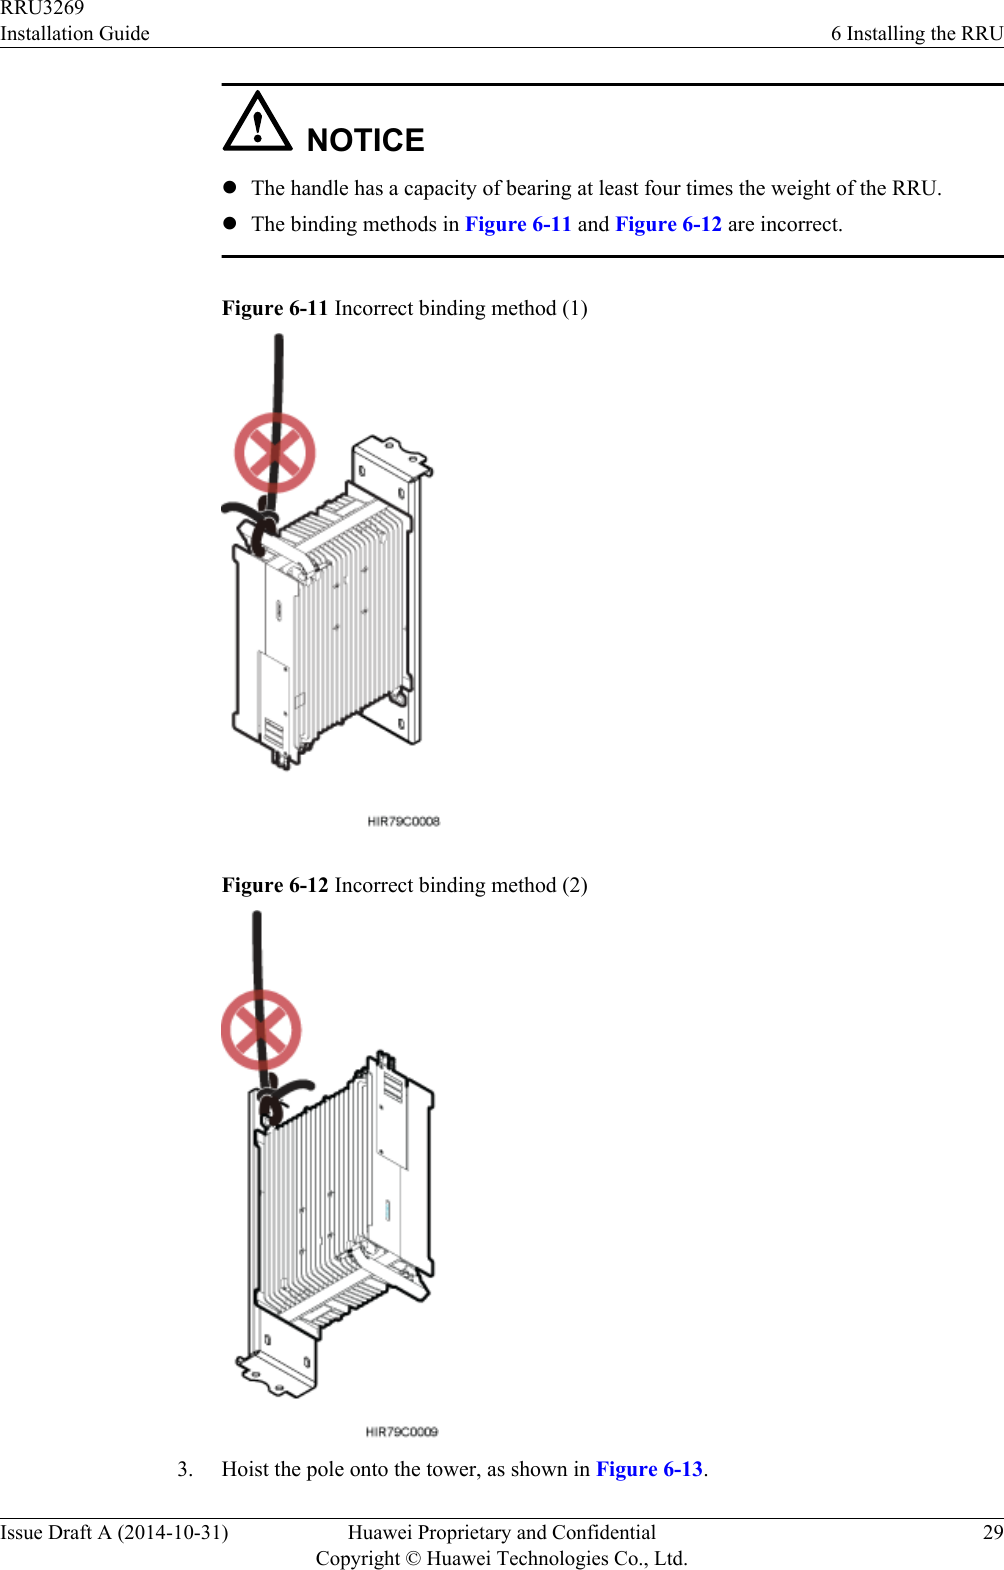 NOTICElThe handle has a capacity of bearing at least four times the weight of the RRU.lThe binding methods in Figure 6-11 and Figure 6-12 are incorrect.Figure 6-11 Incorrect binding method (1)Figure 6-12 Incorrect binding method (2)3. Hoist the pole onto the tower, as shown in Figure 6-13.RRU3269Installation Guide 6 Installing the RRUIssue Draft A (2014-10-31) Huawei Proprietary and ConfidentialCopyright © Huawei Technologies Co., Ltd.29